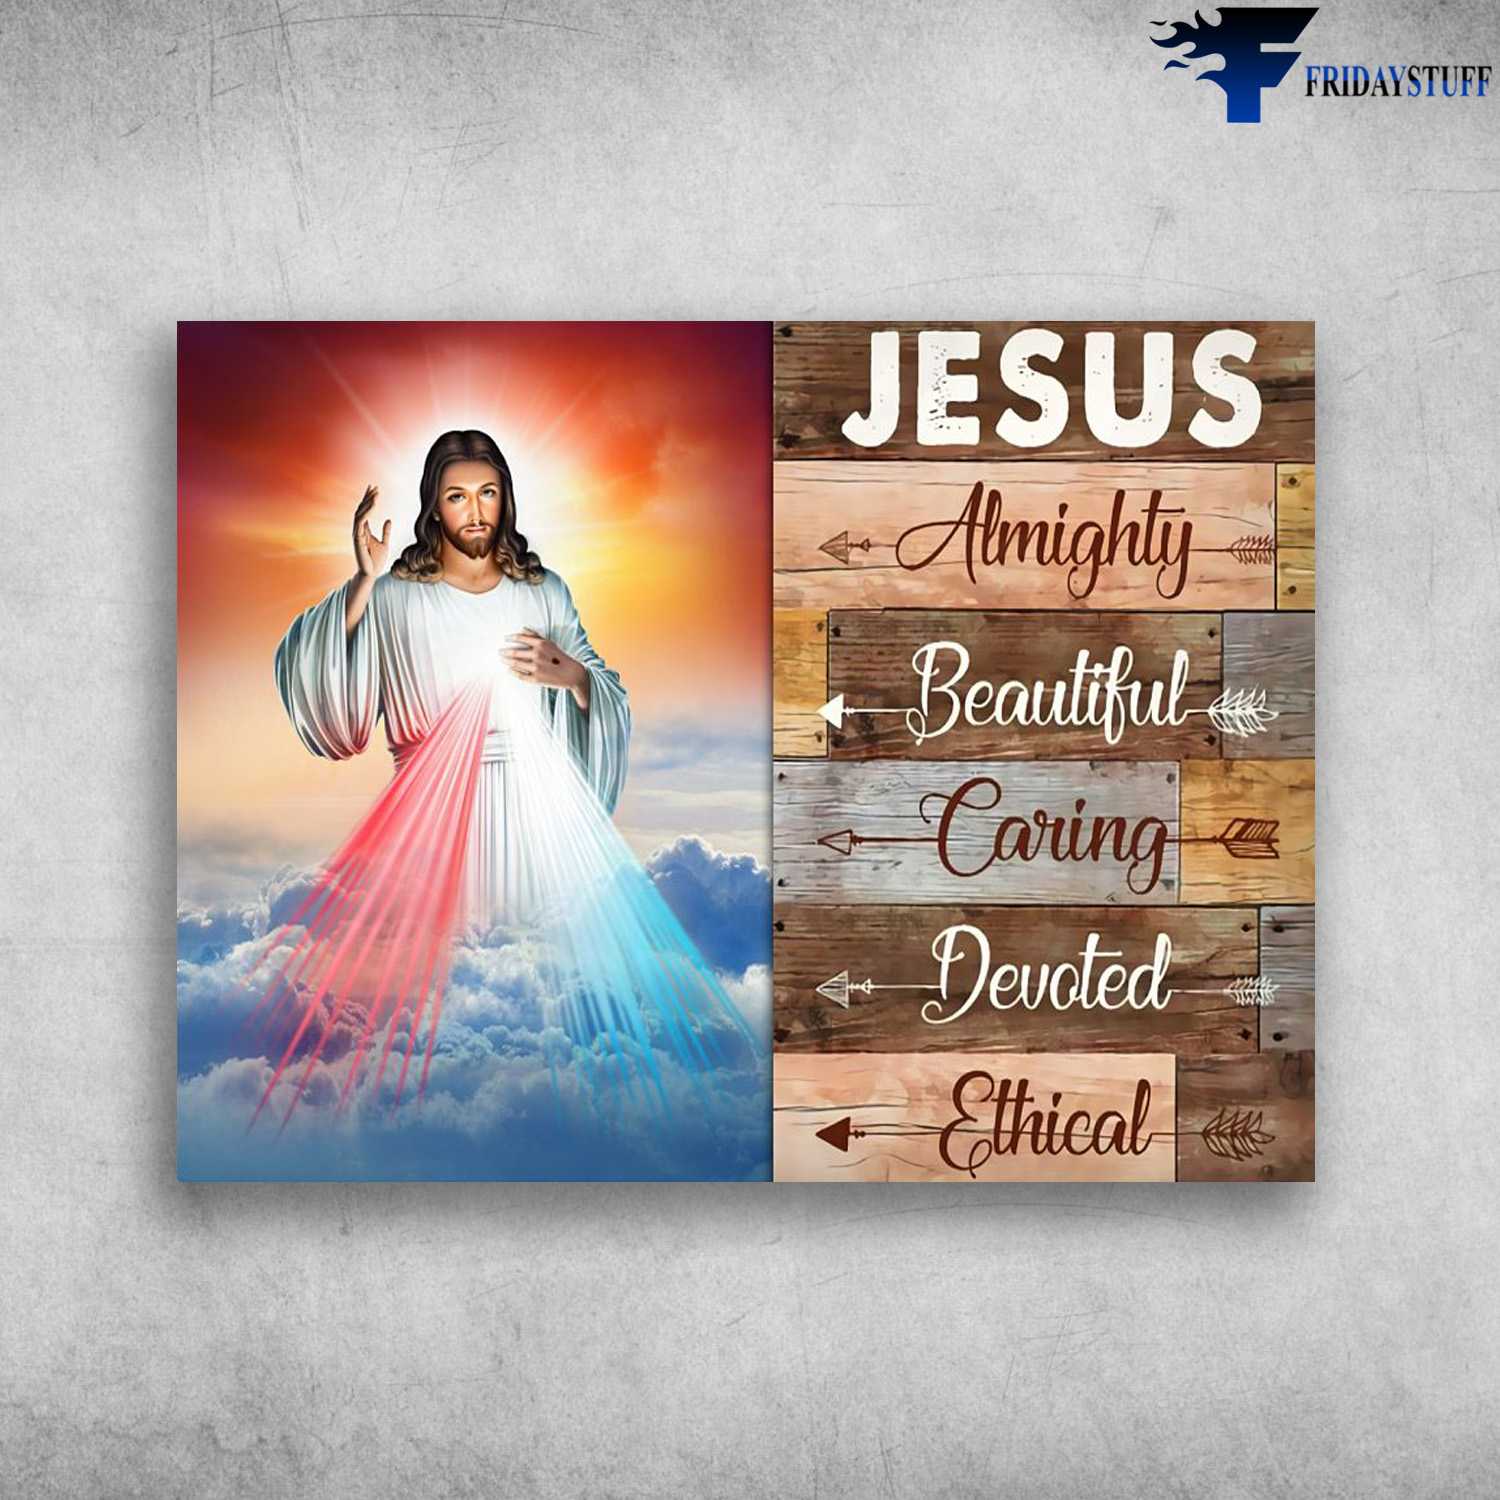 Jesus Poster, Jesus Almighty, Beautiful, Caring, Devoted, Ethical